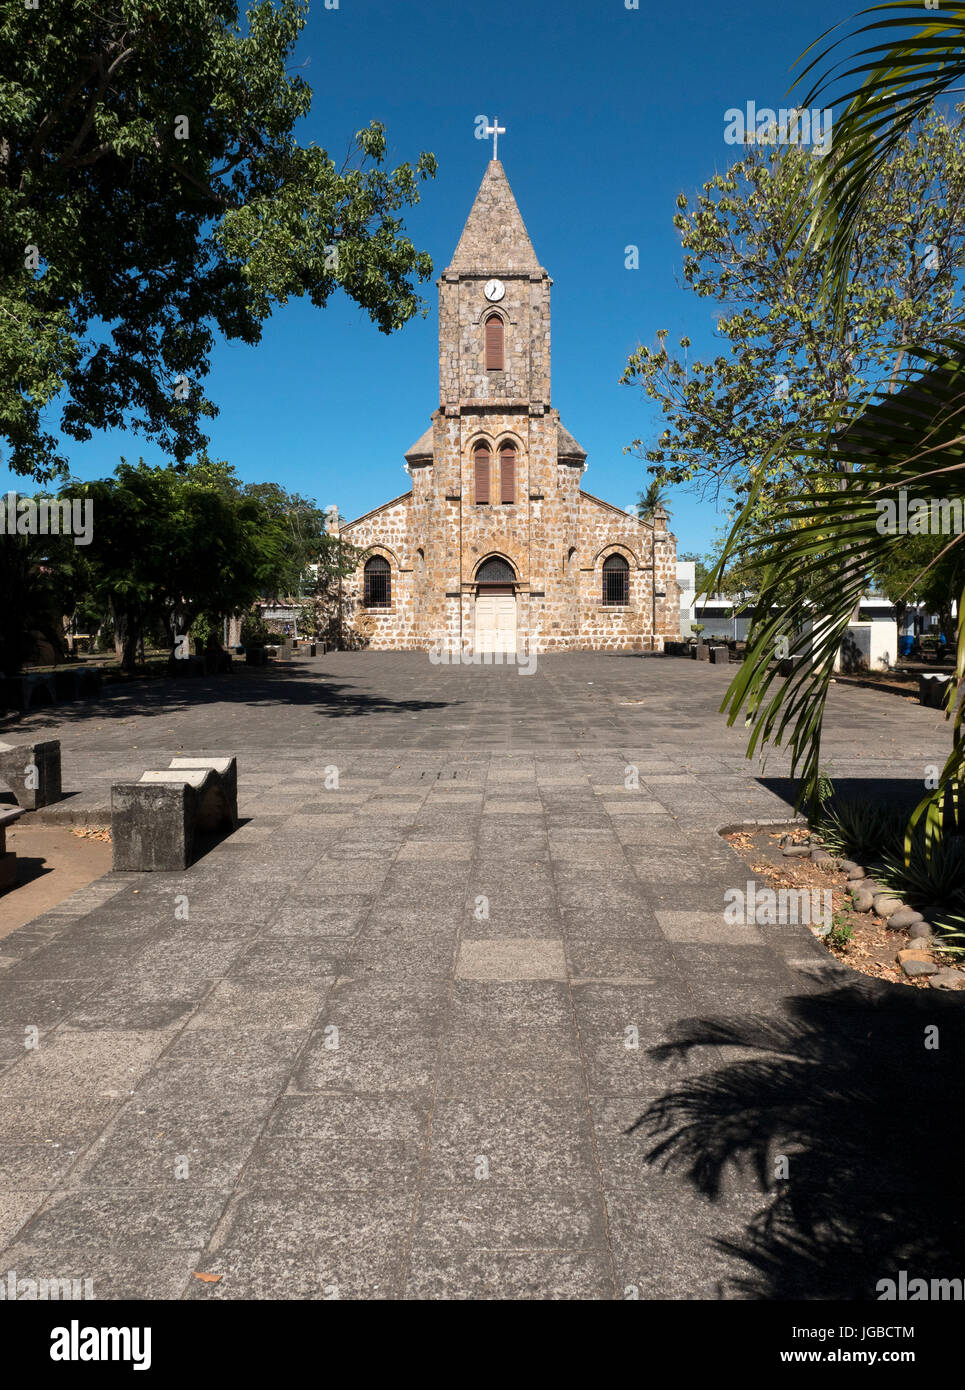 Our Lady of Mount Carmel Cathedral Also Known As Puntarenas Cathedral, Puntarenas Costa Rica Stock Photo